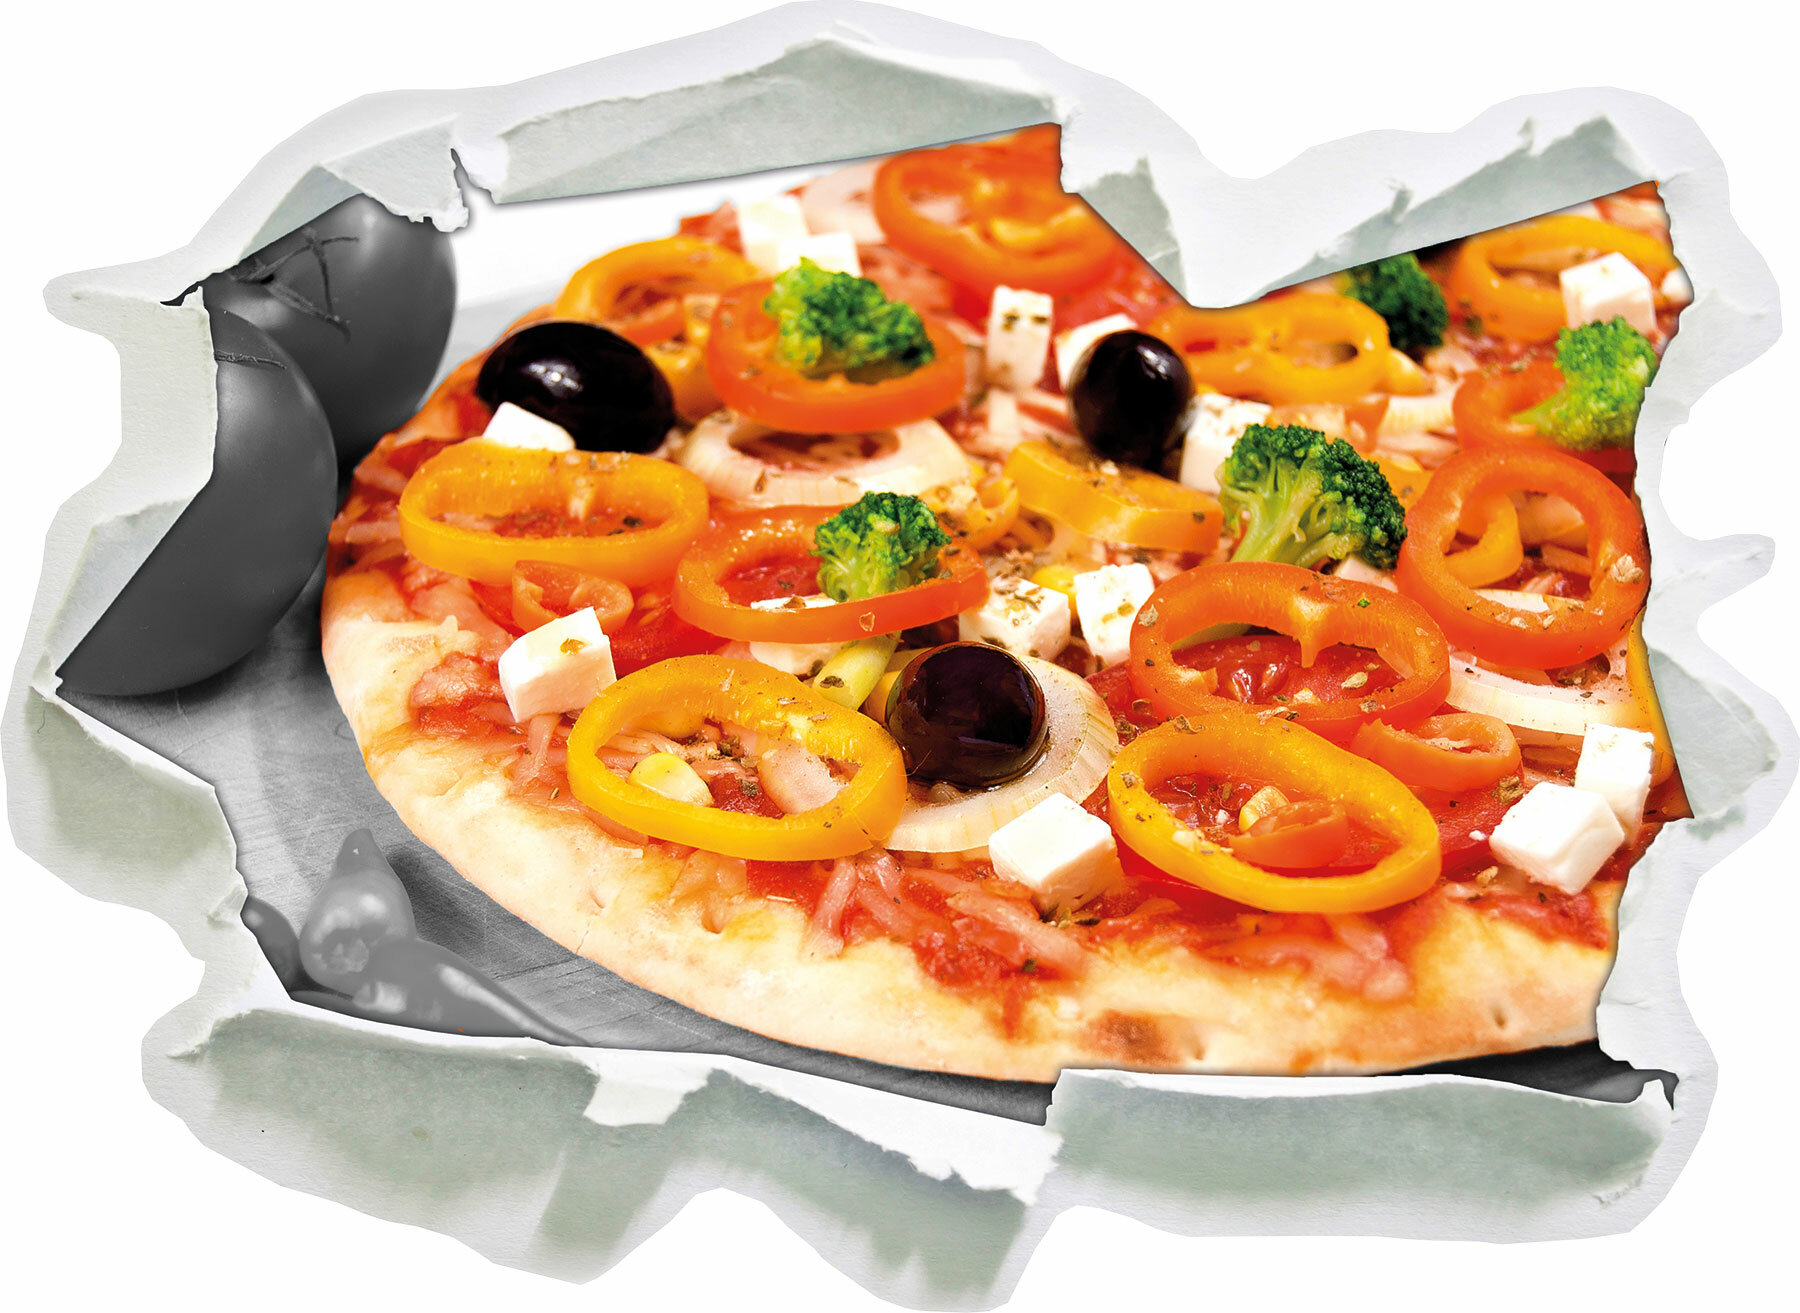 East Urban Home Delicious Pizza With Olives And Cottage Cheese